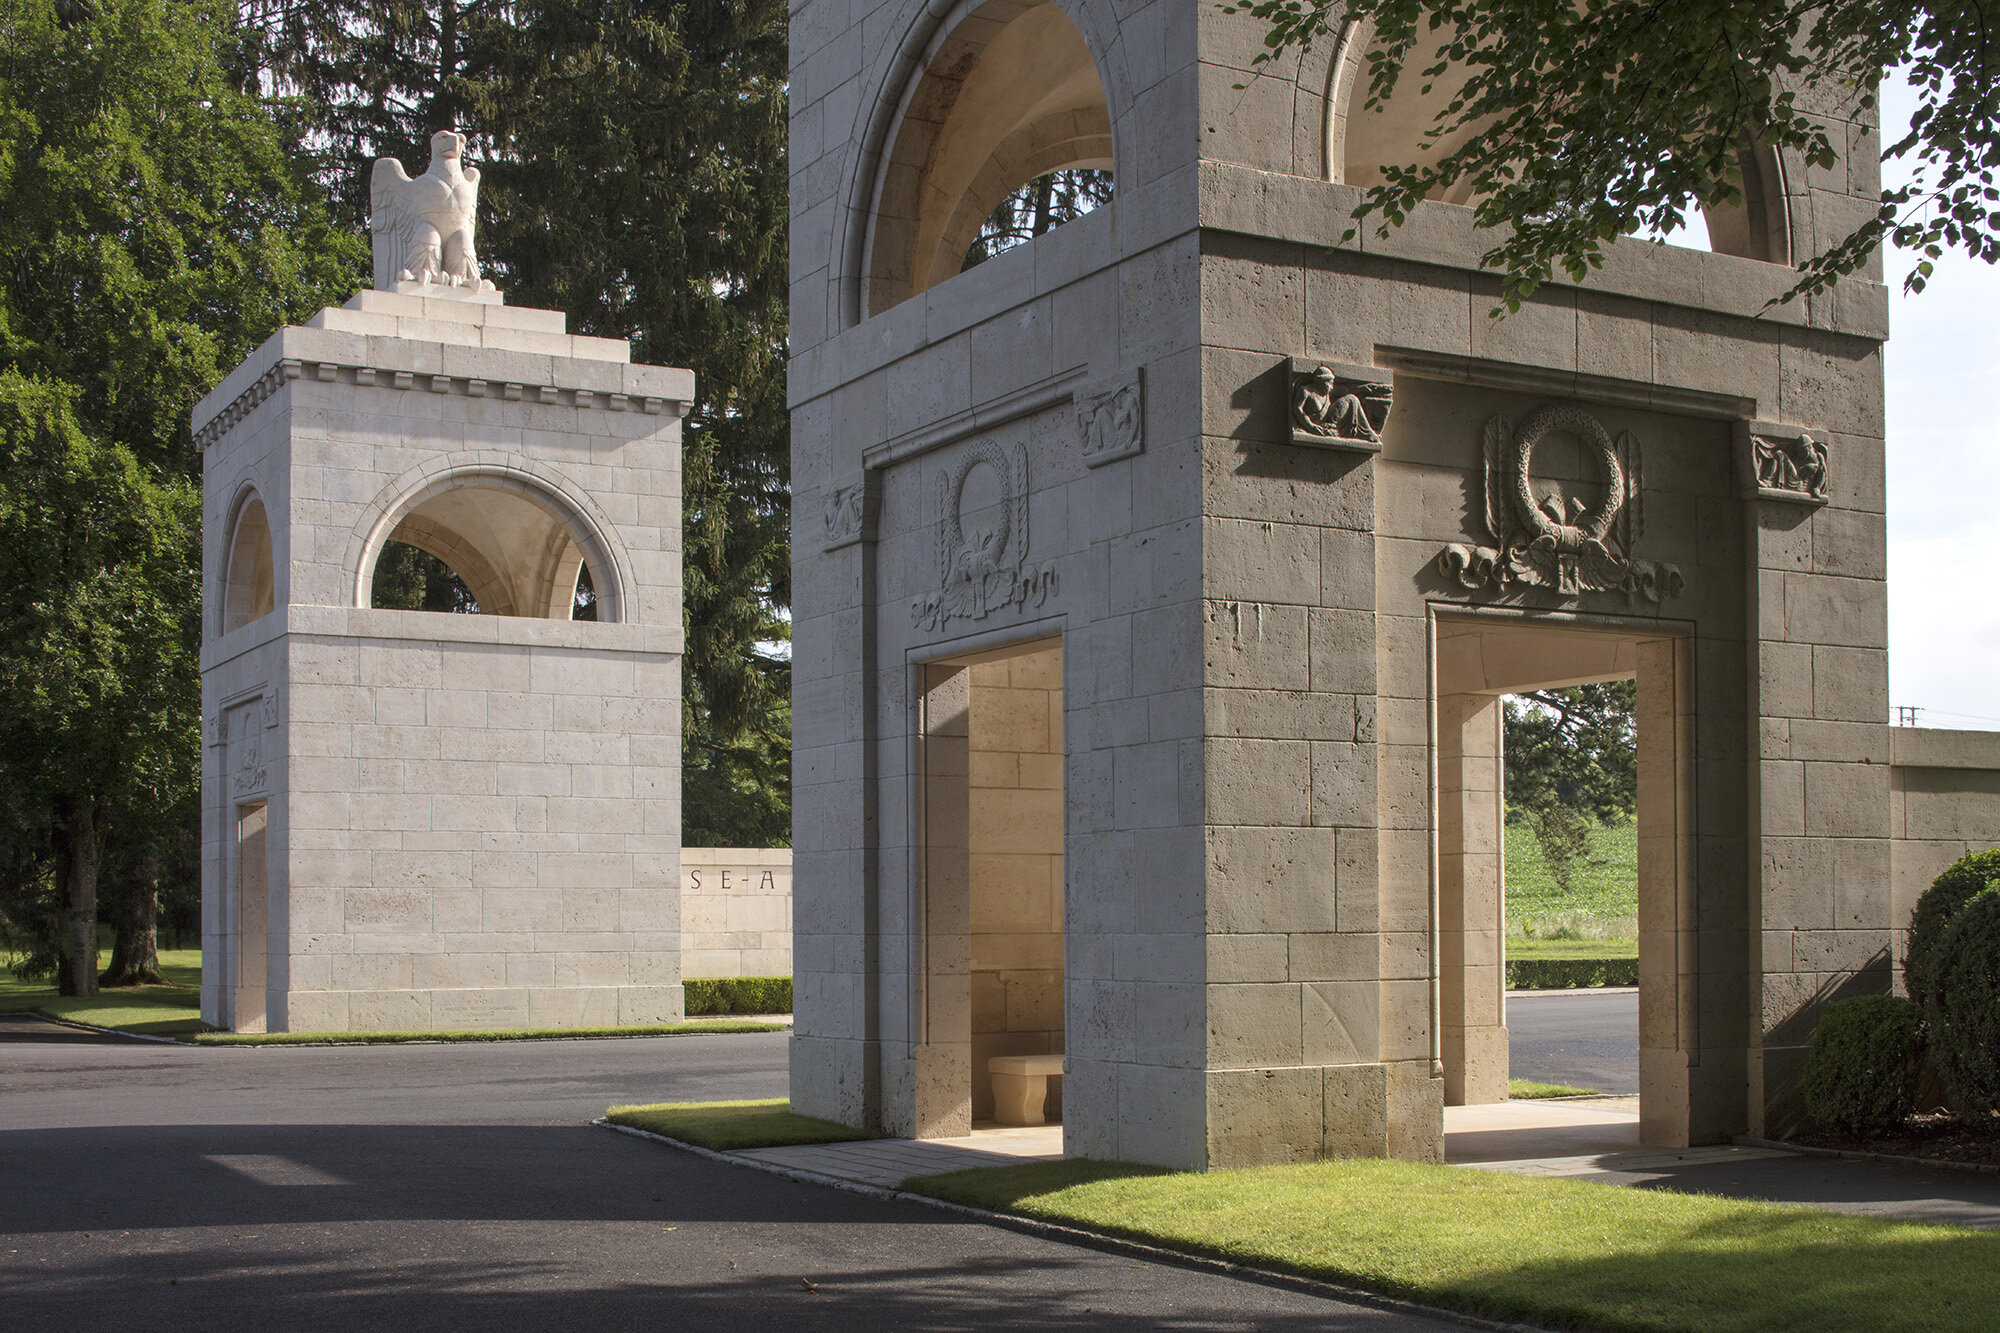 Meuse-Argonne American Cemetery and Memorial